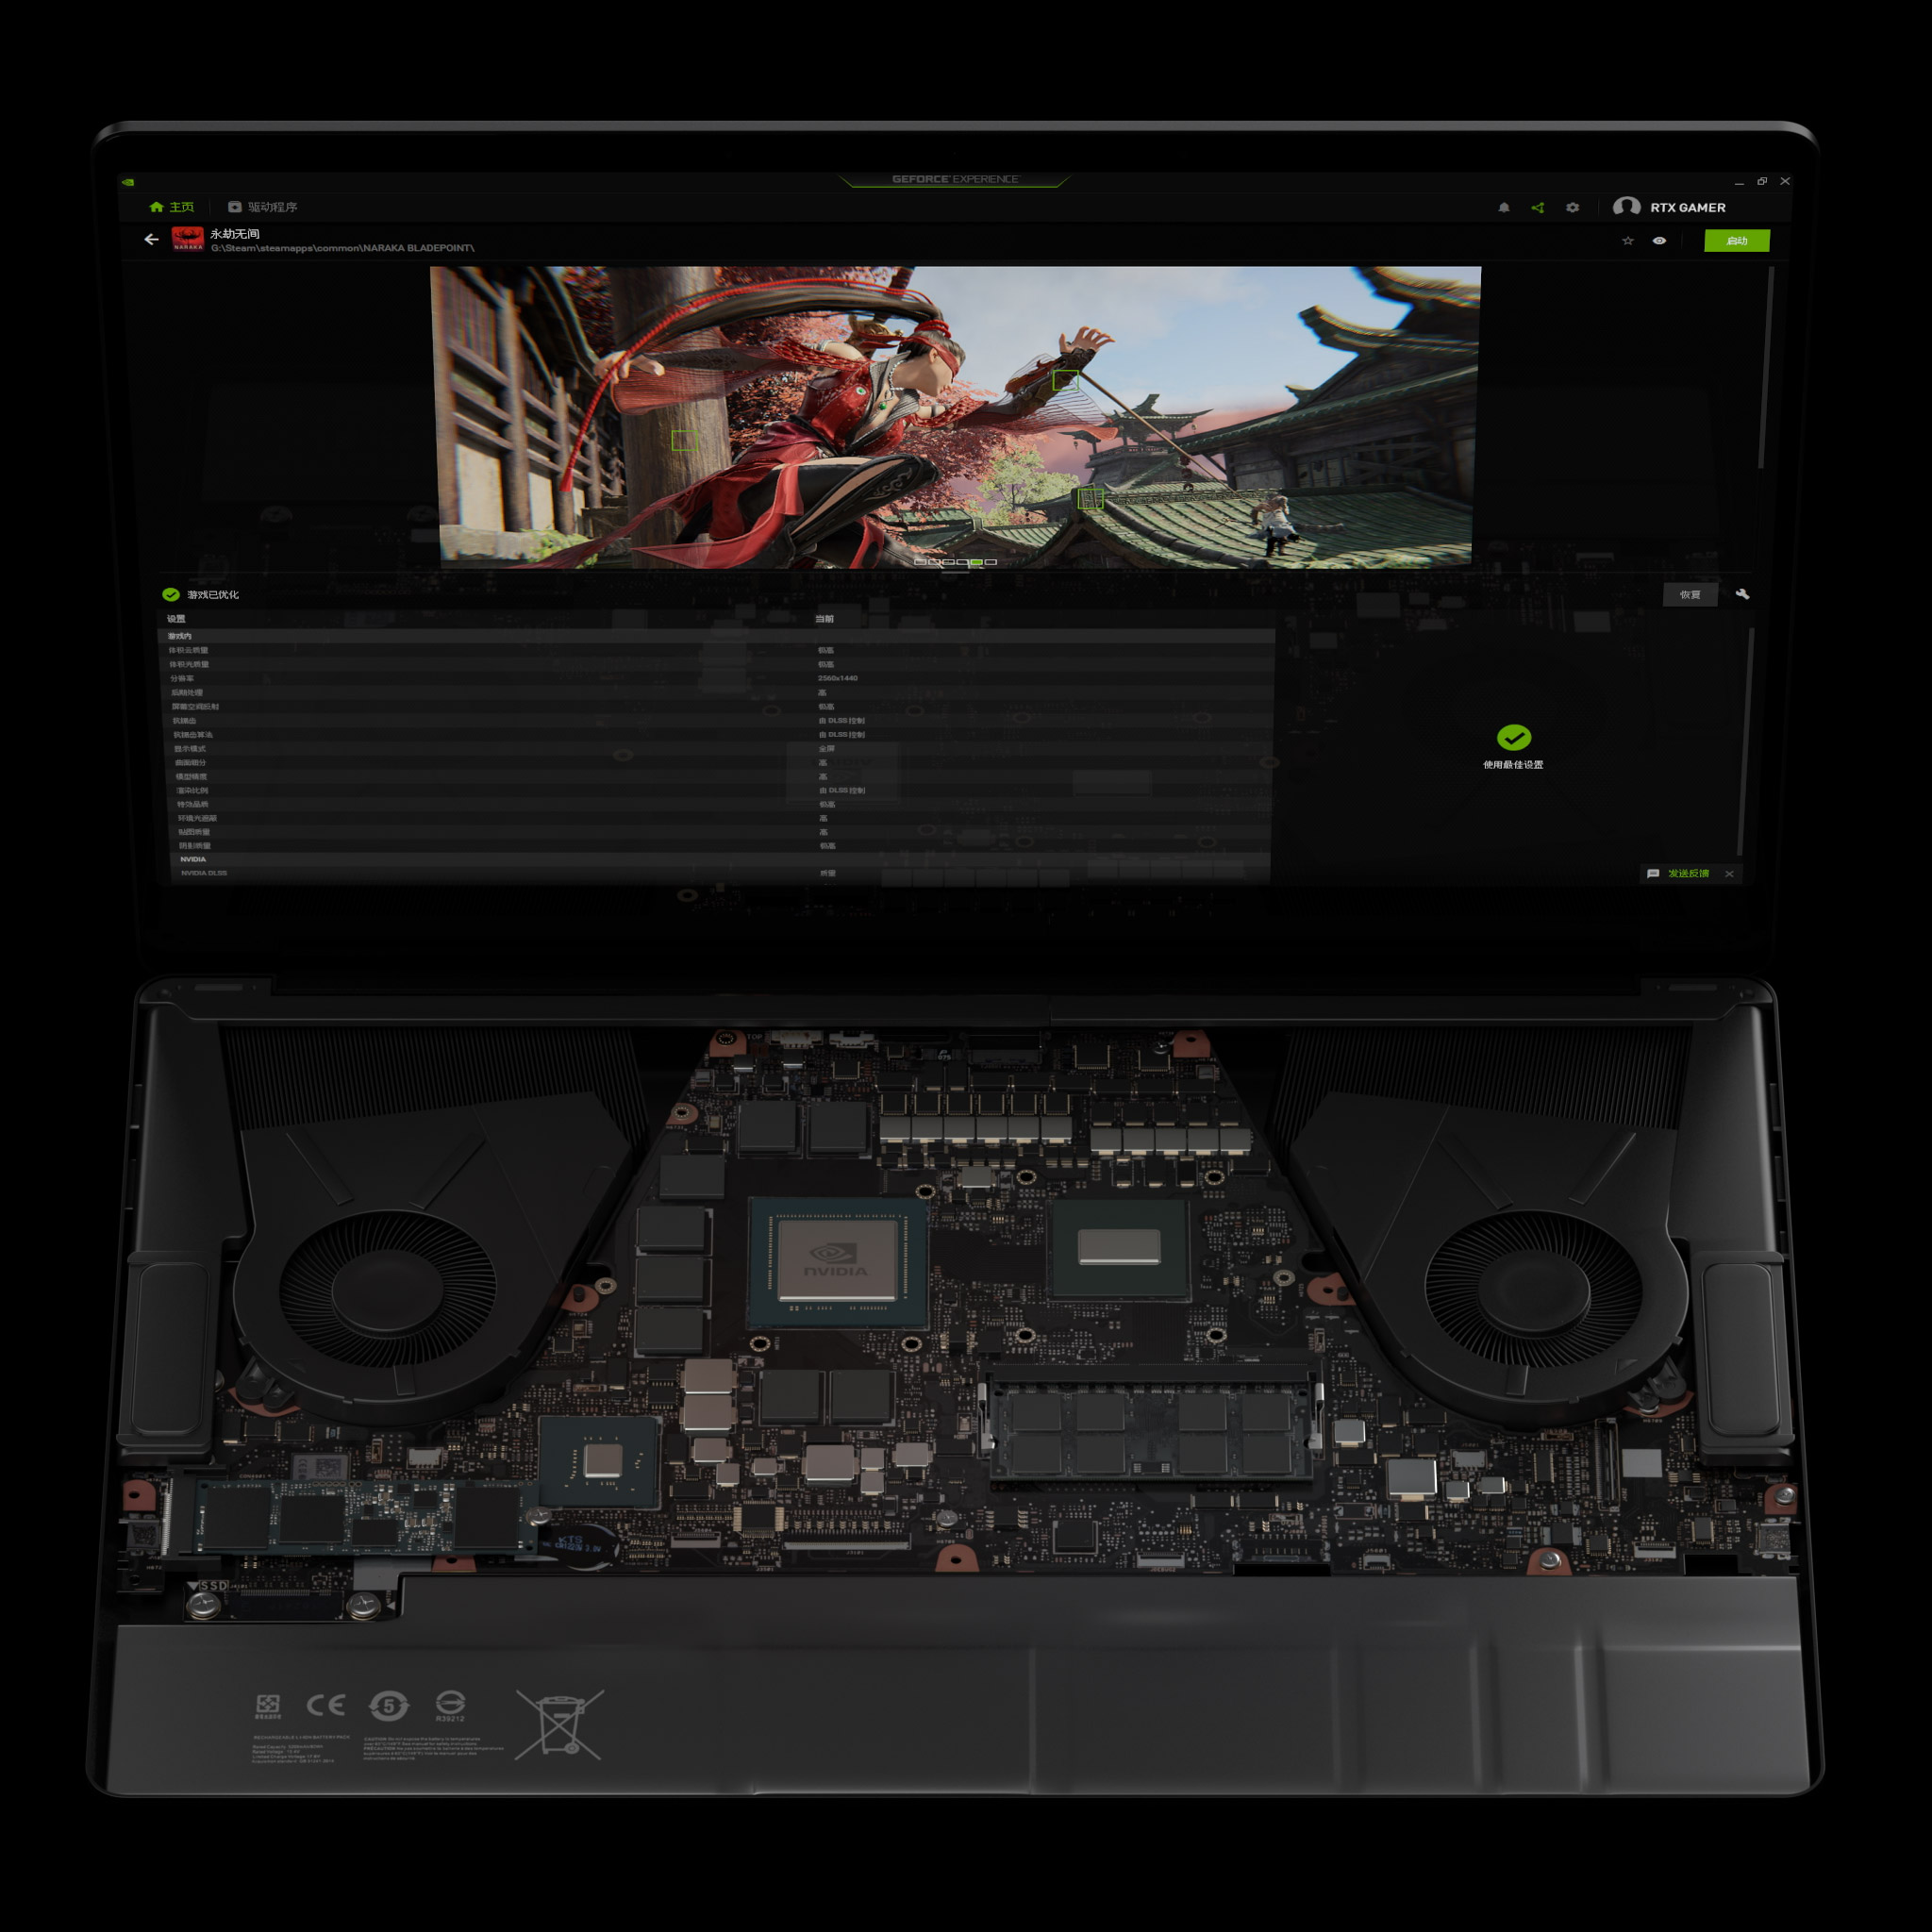 GeForce Laptop with Max-Q optimal playable settings in GeForce Experience for Naraka